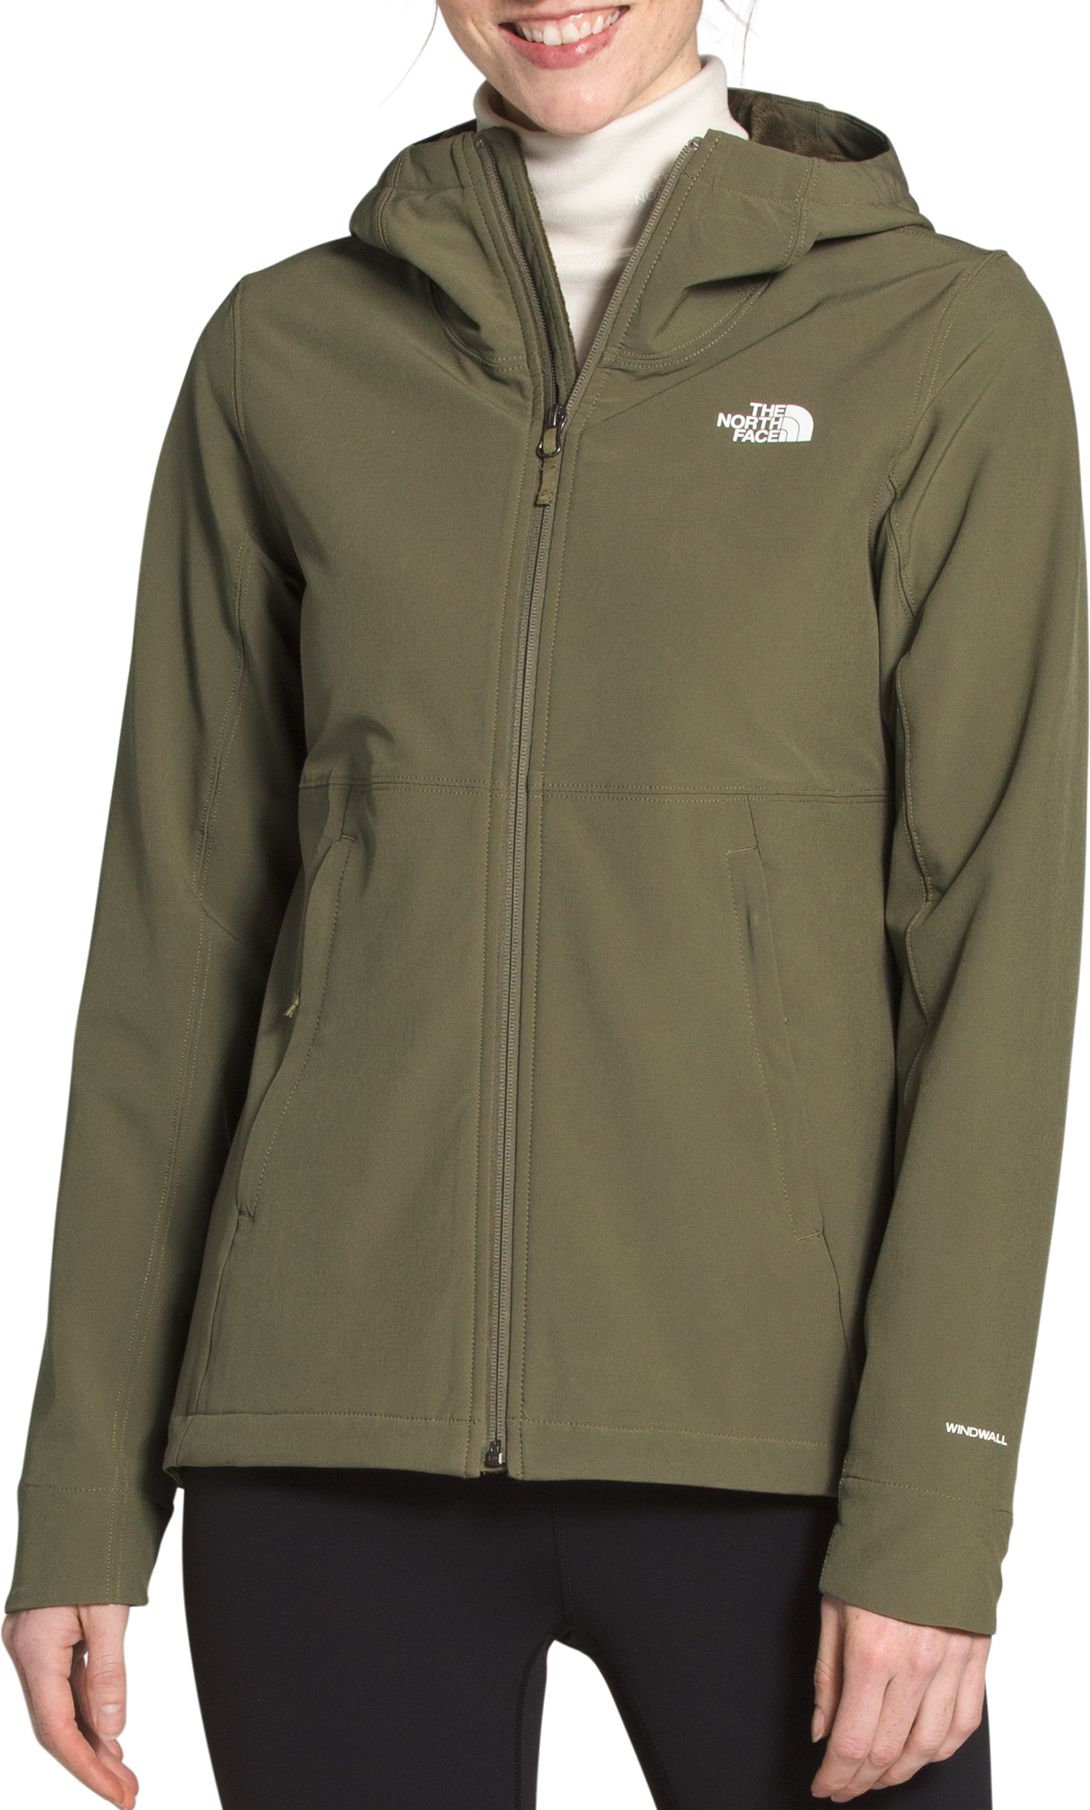 north face shelby raschel